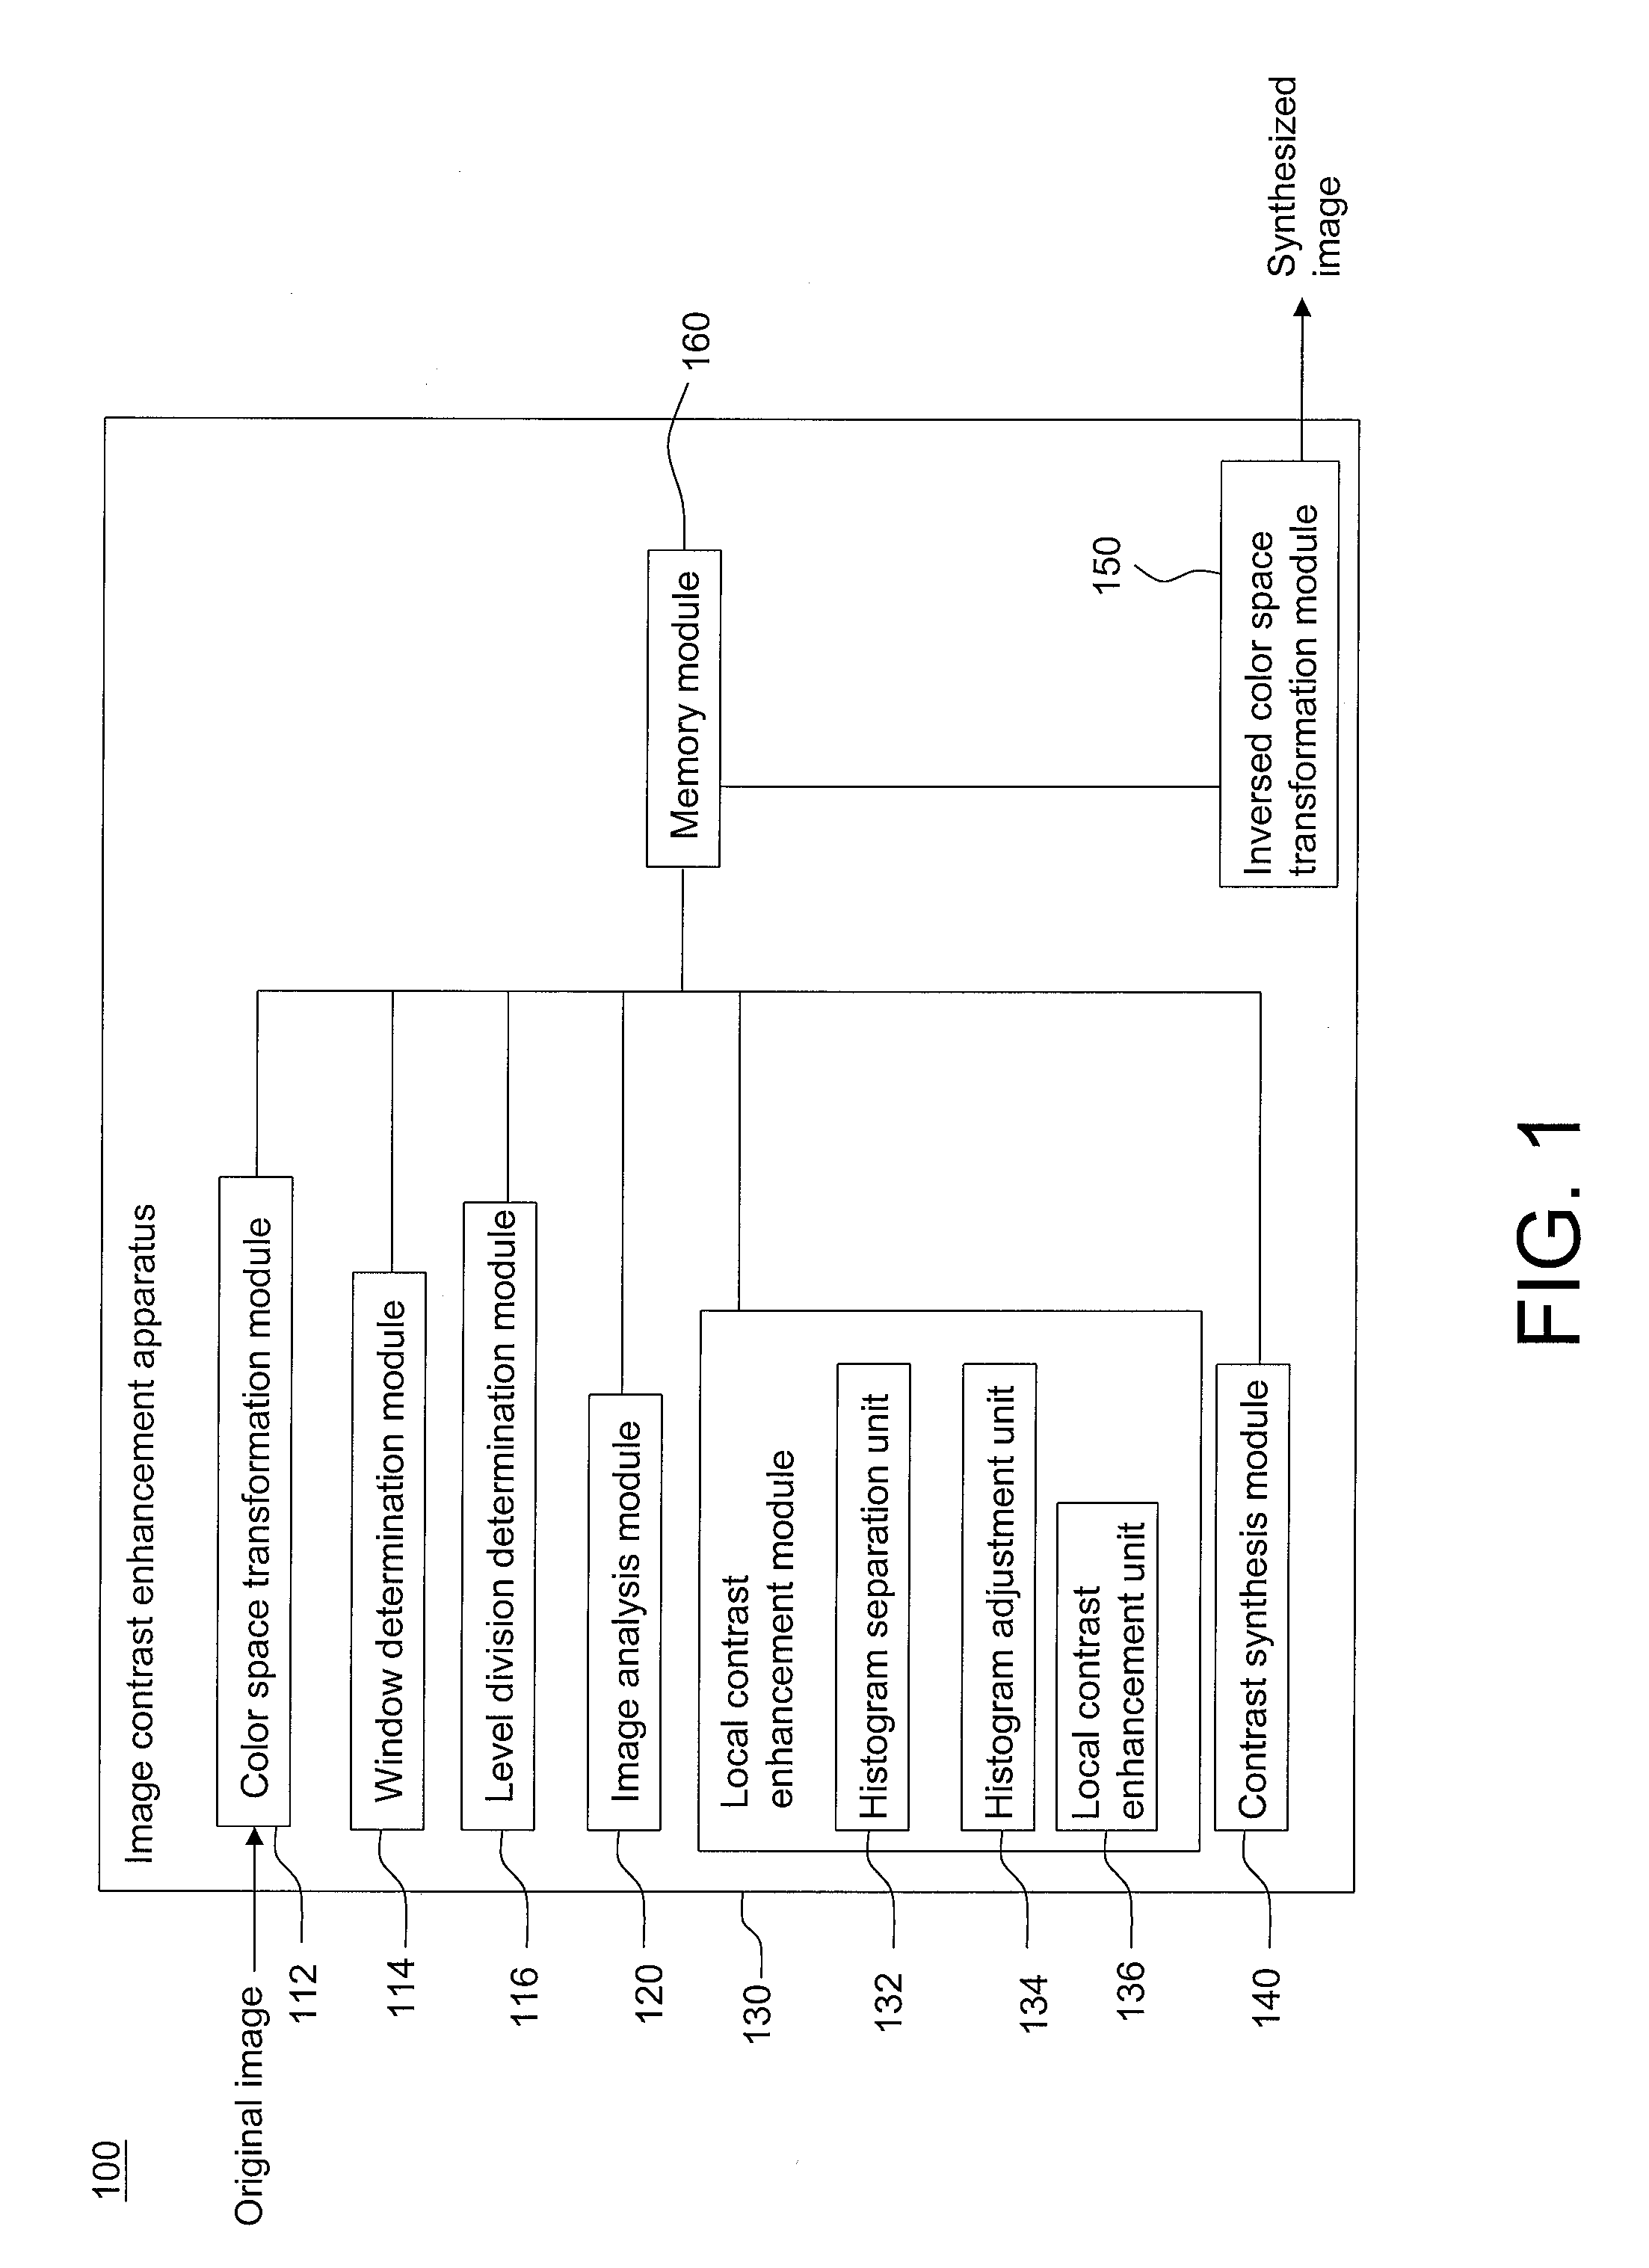 Image contrast enhancement apparatus and method thereof